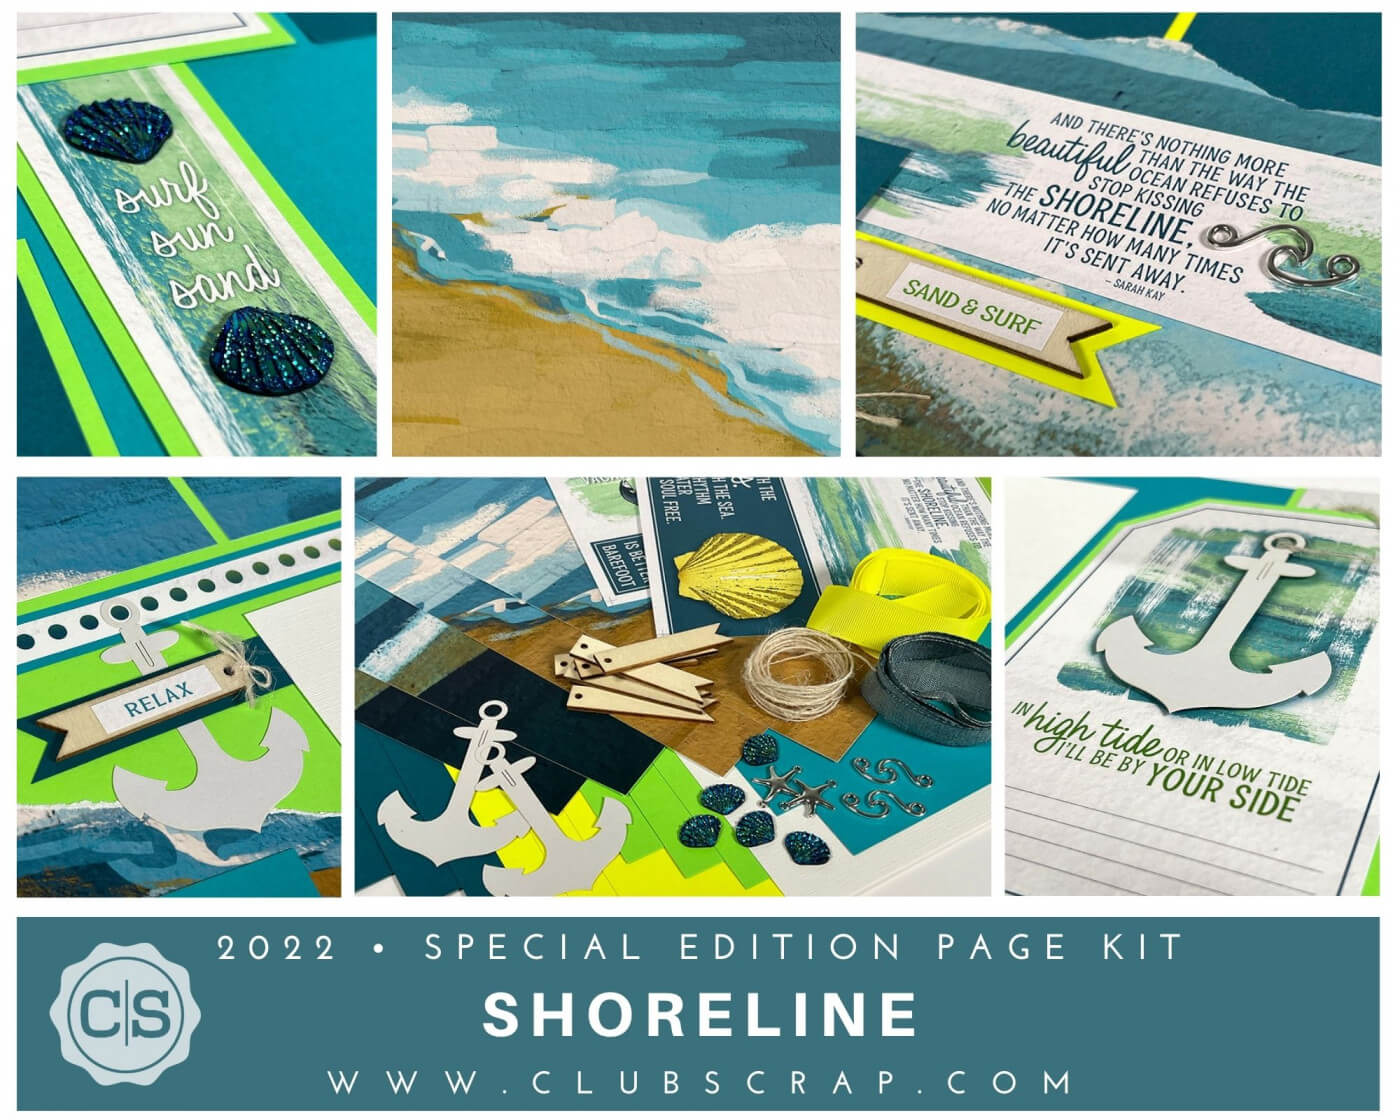 Shoreline Page Kit from Club Scrap #clubscrap